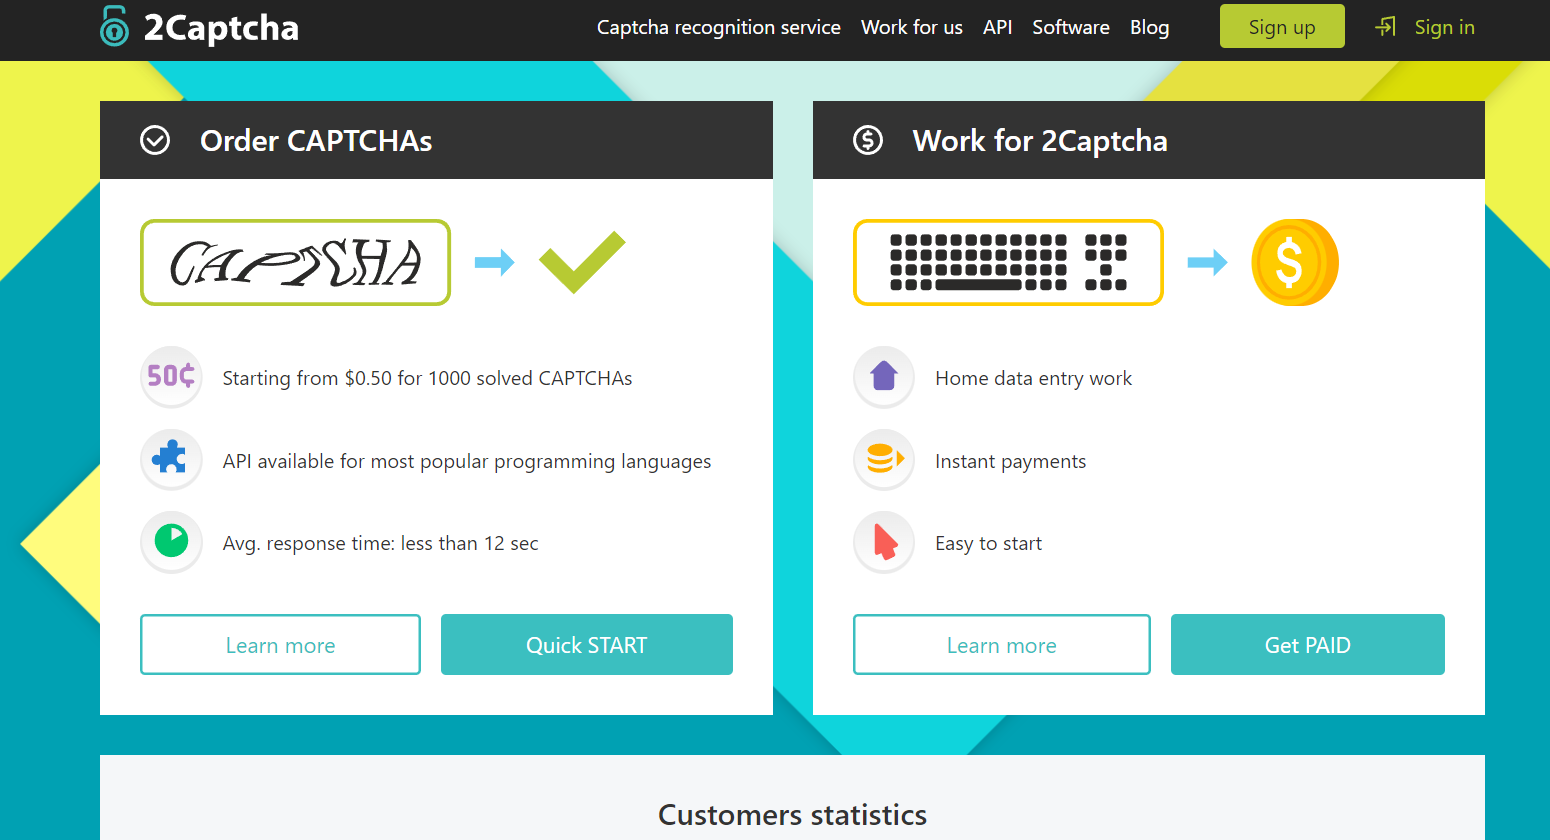 earn money by solving captcha